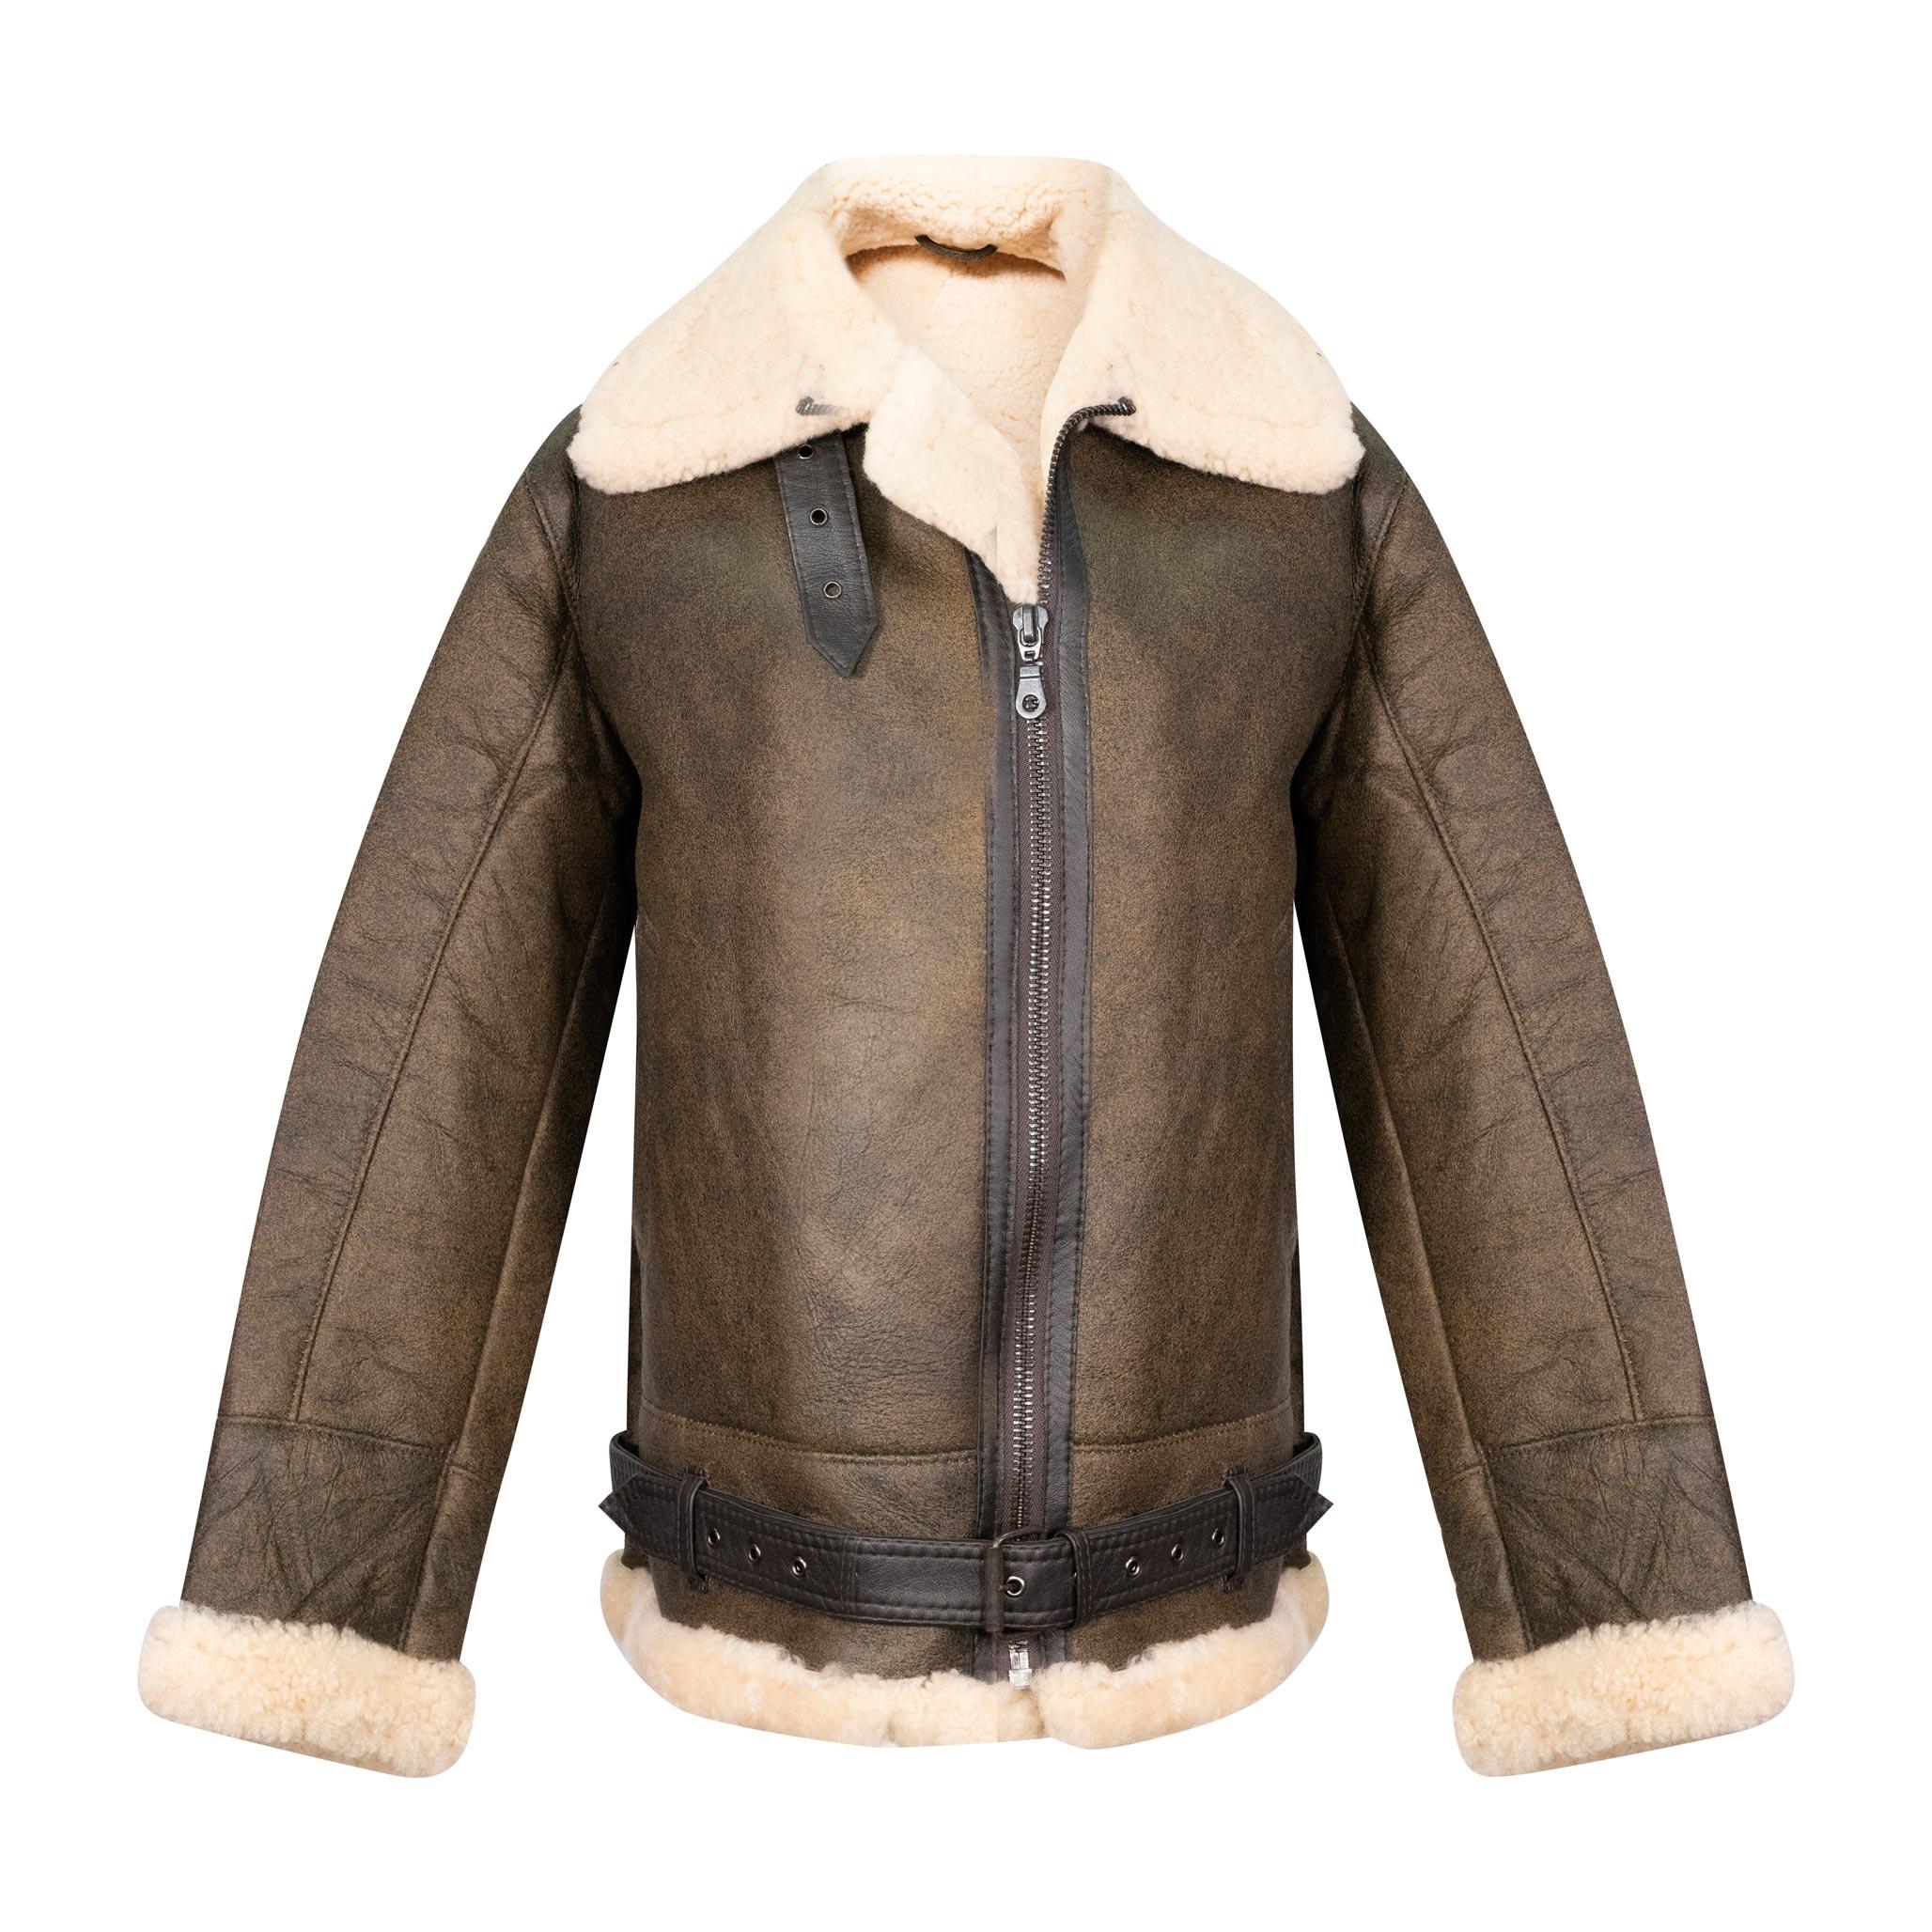 A luxury waist length sheepskin jacket in a tan colour with cream inner lined fur